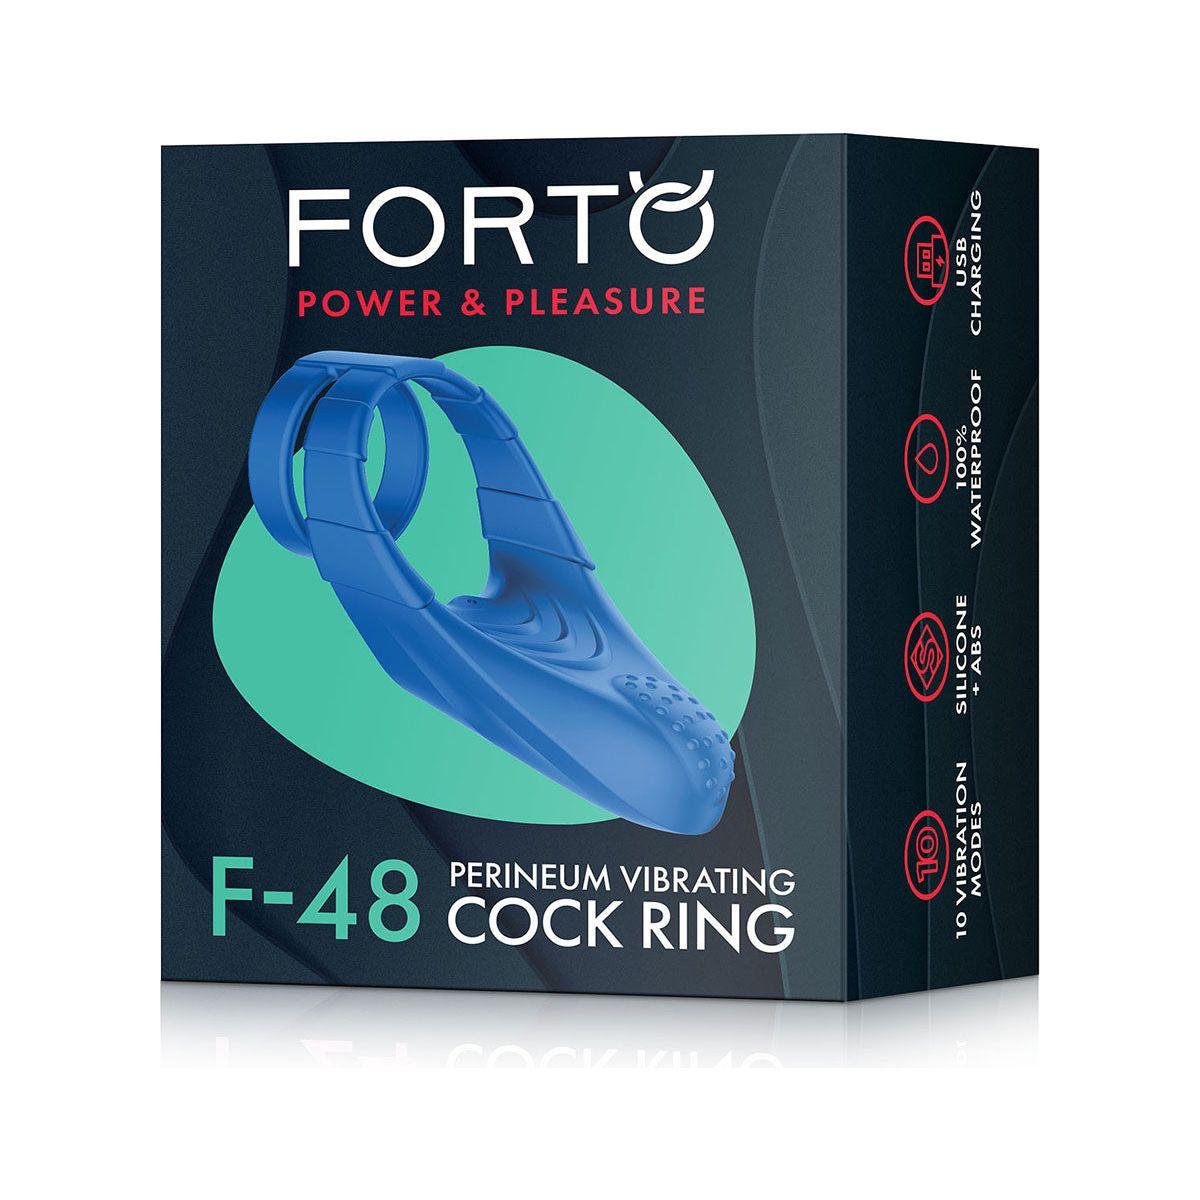 FORTO F-48 Vibrating Perineum Double C-Ring - Blue - shop enby